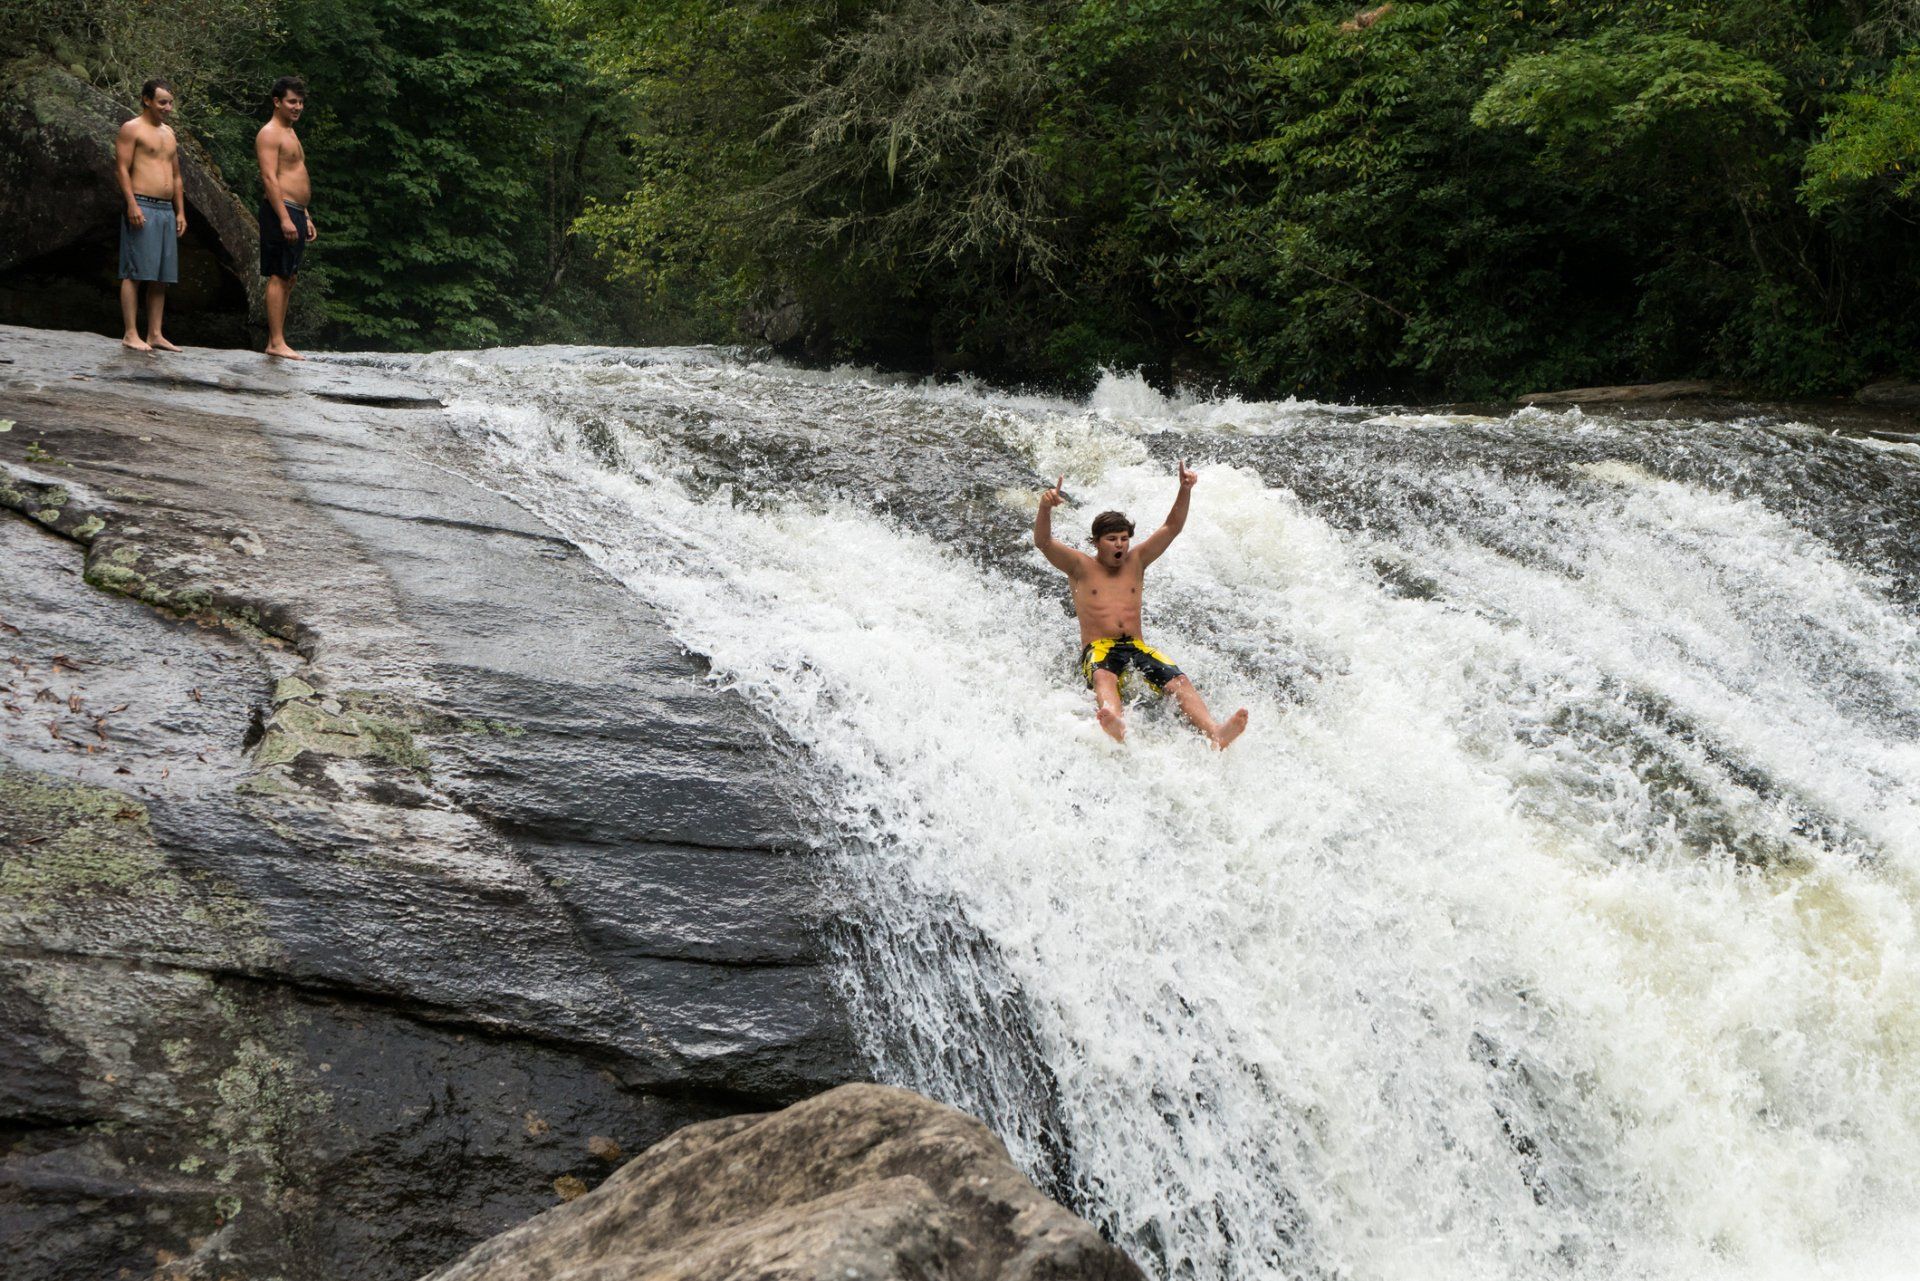 A man is sliding down a waterfall with his arms in the air.